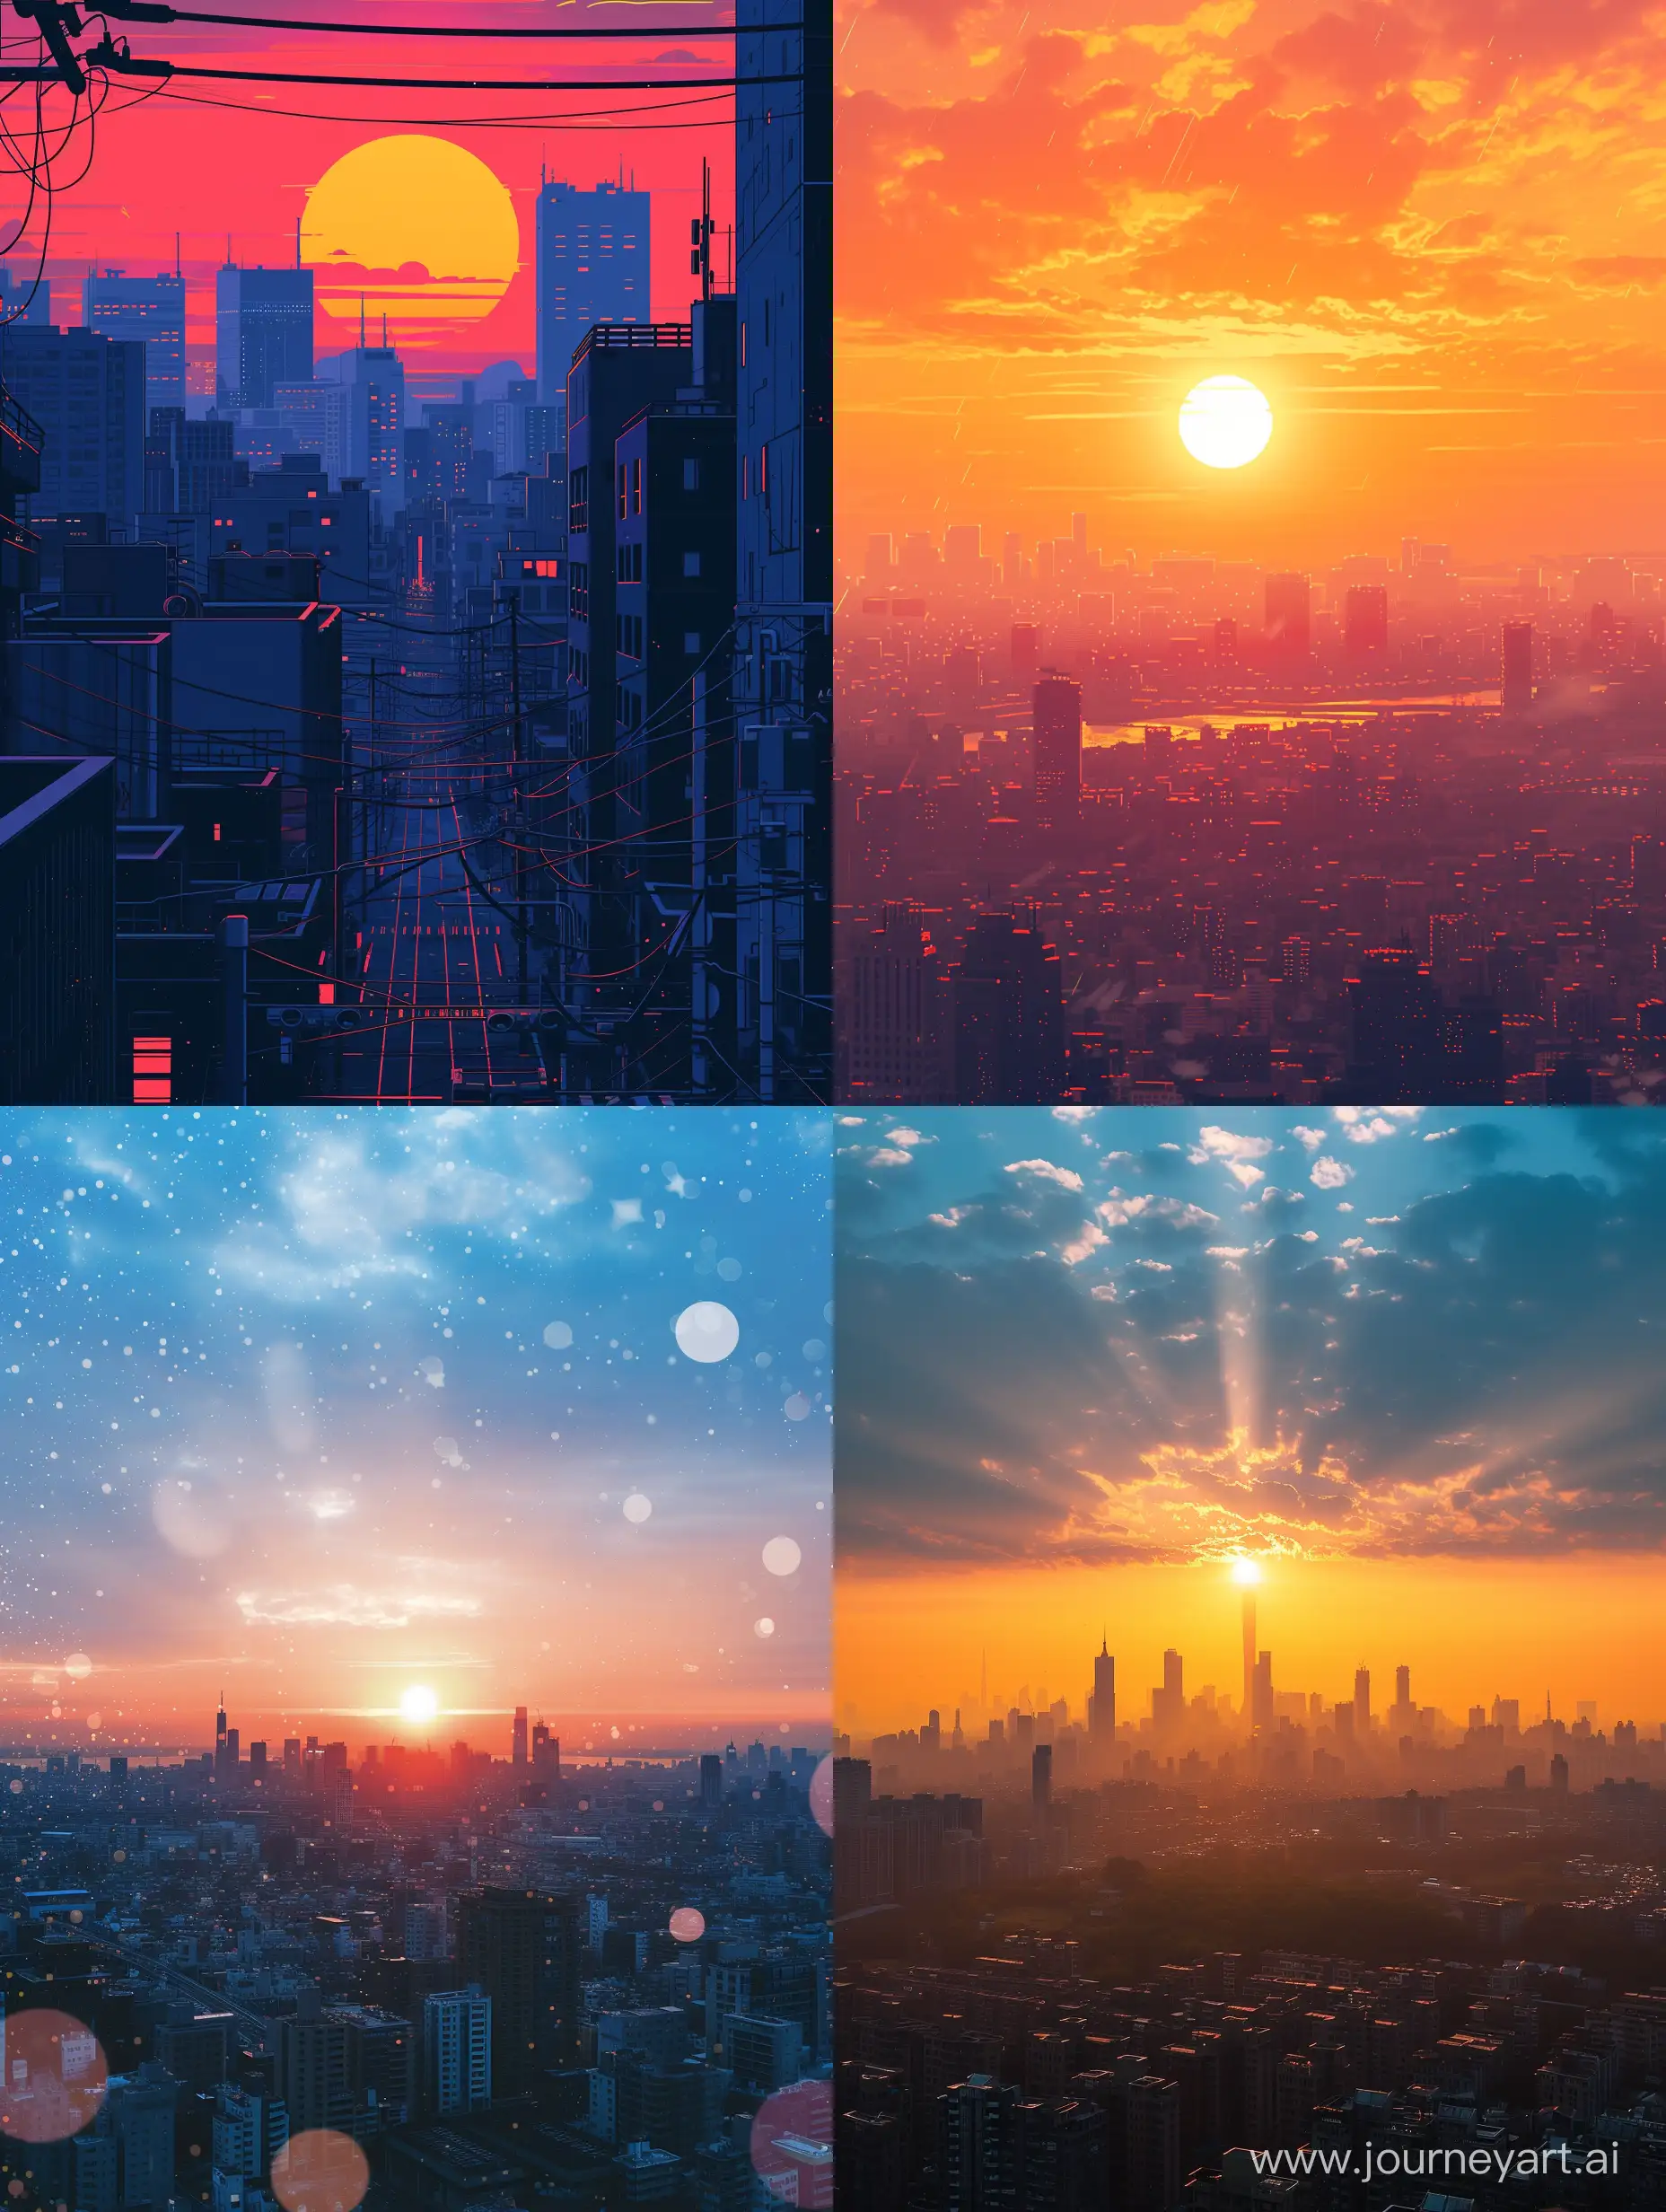  A sunrise over a cityscape with hustle-related elements.